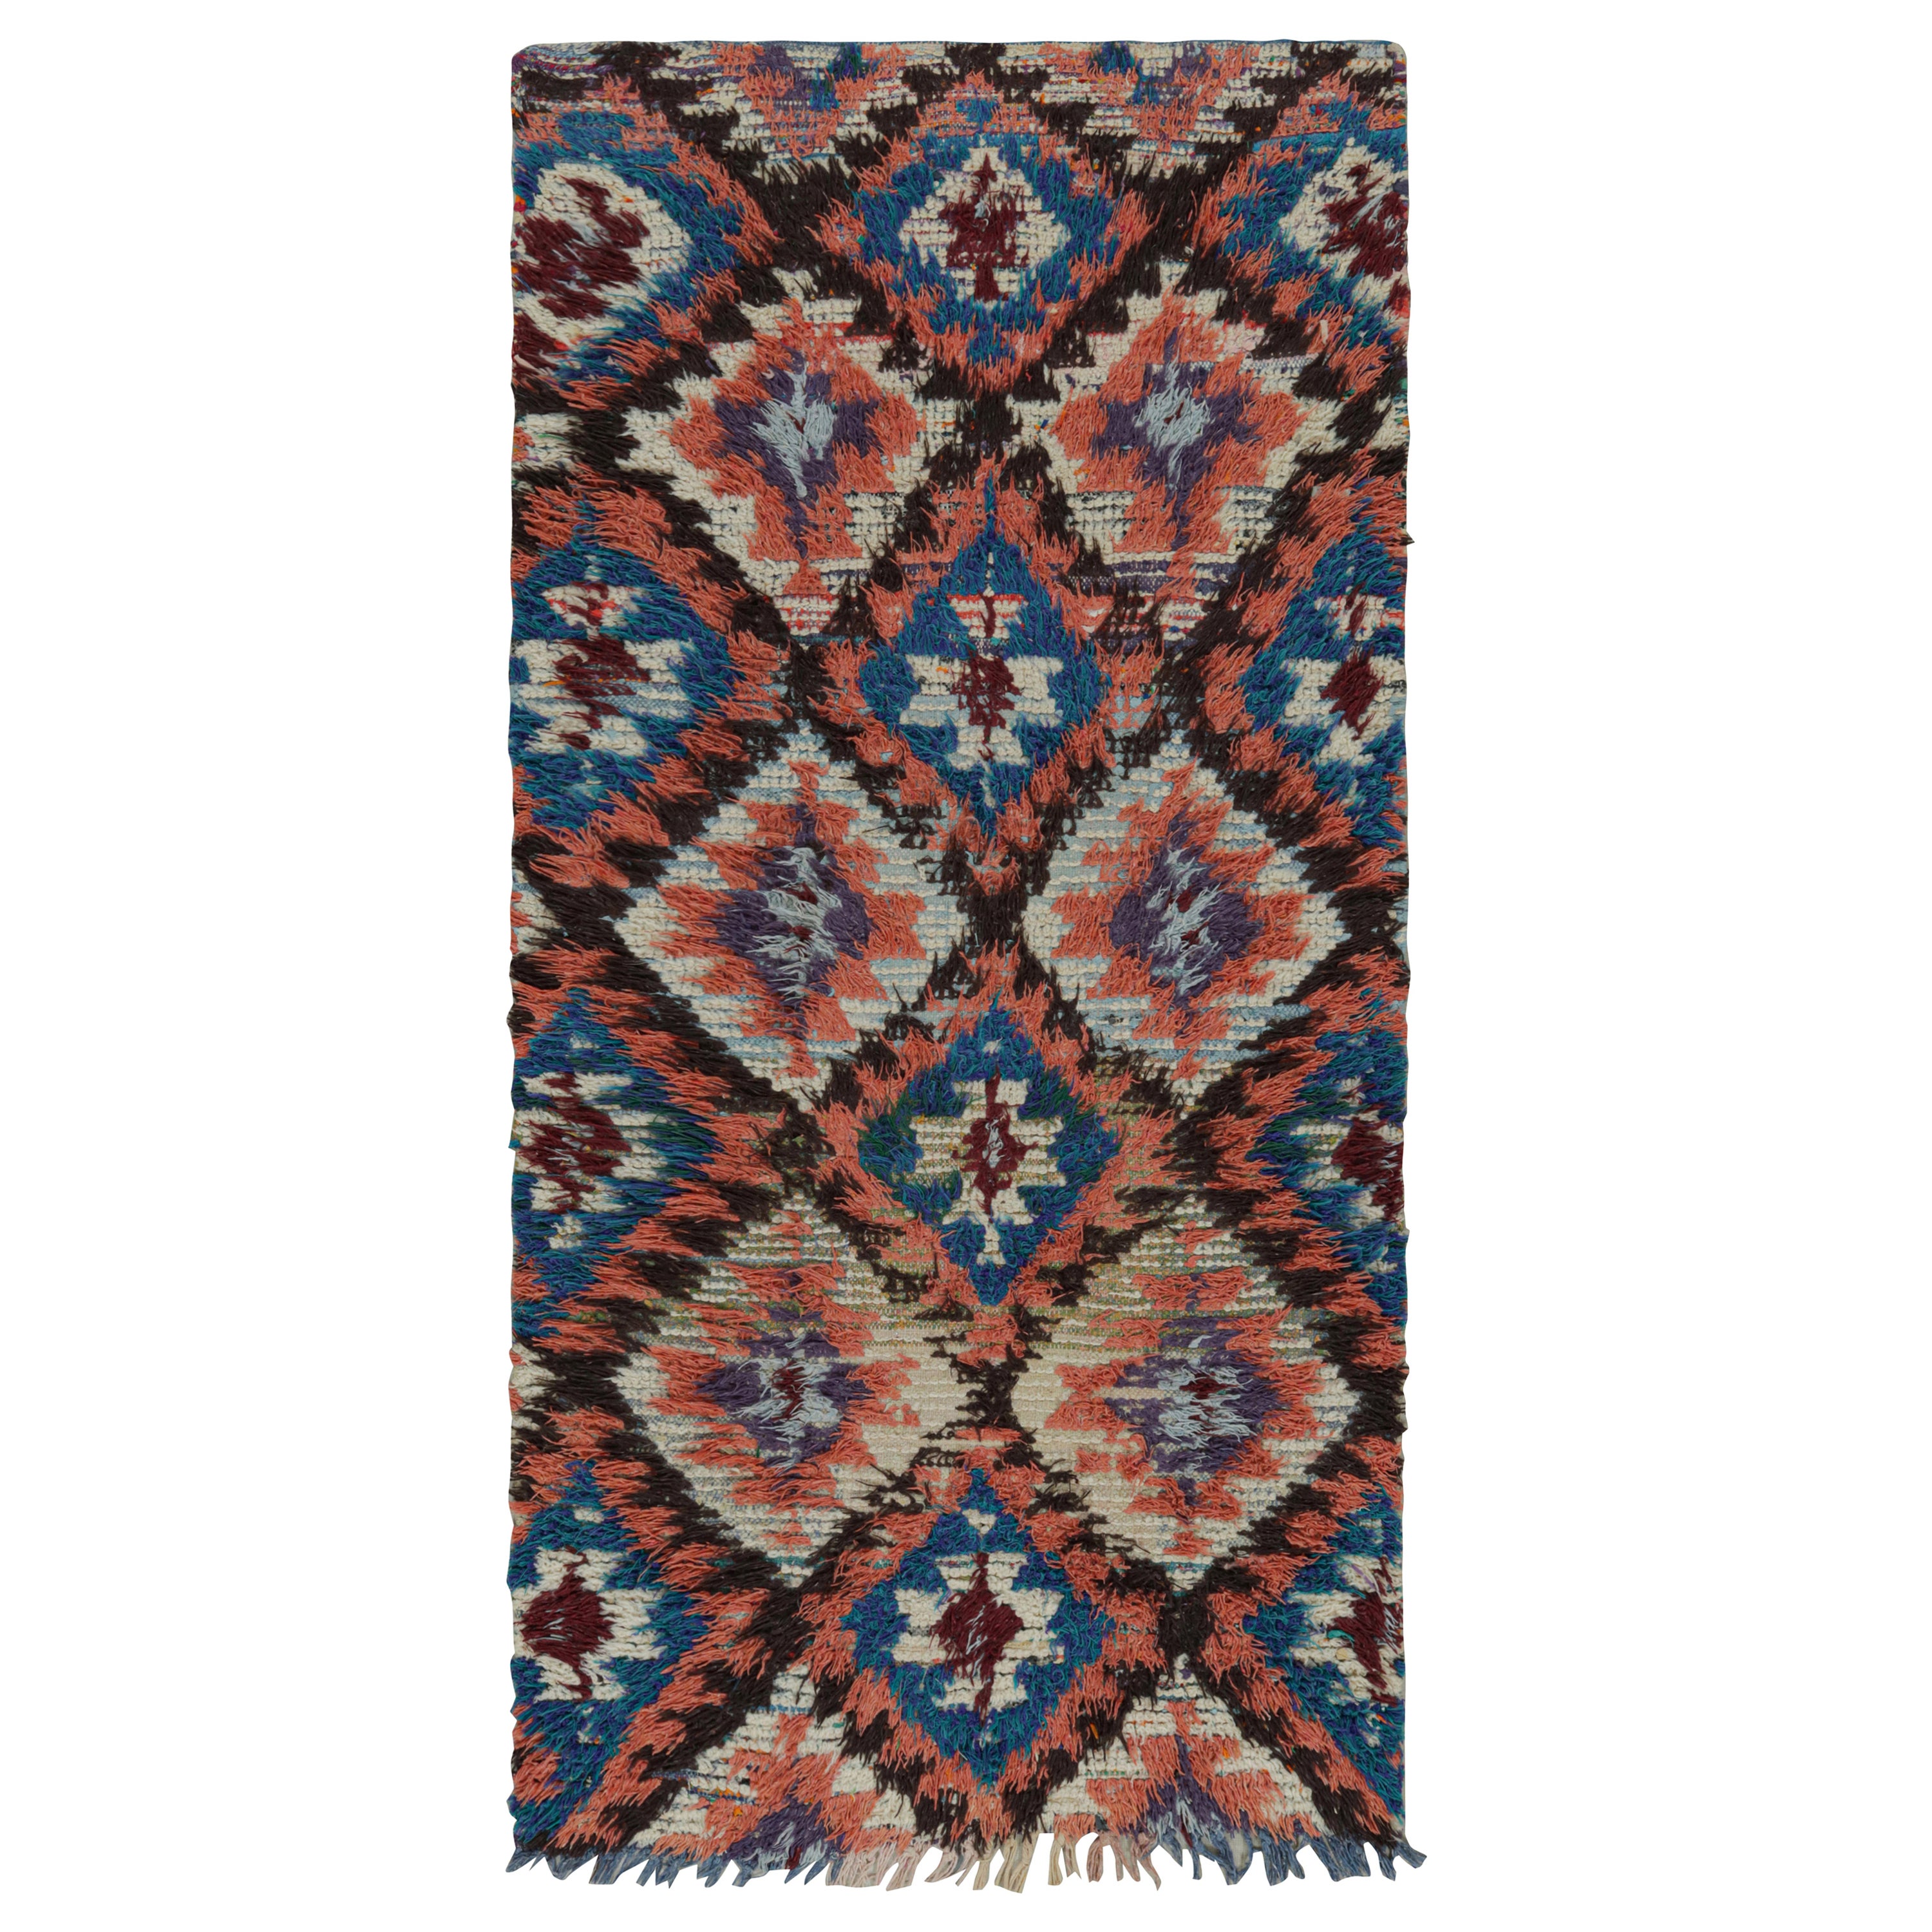 Vintage Azilal Moroccan Runner Rug, with Diamond Medallions from Rug & Kilim